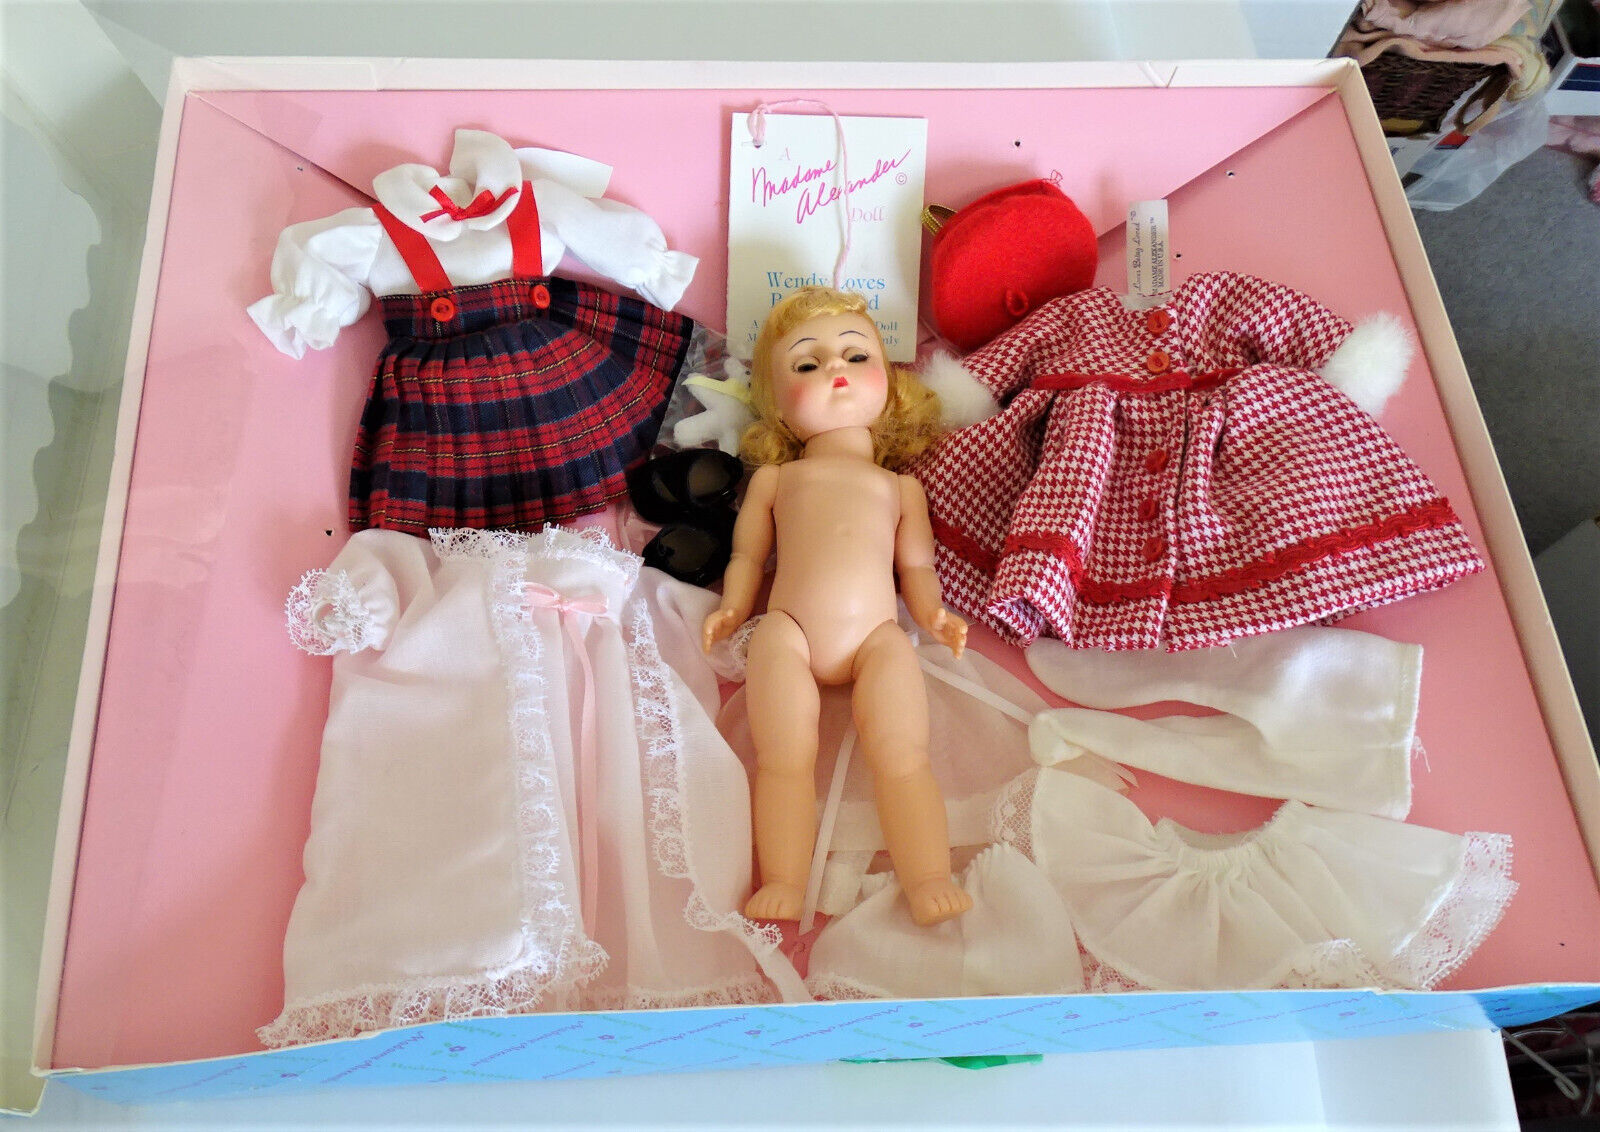 1992 Alexander 8"Wendy Loves Being Loved Gift Set w/ Clothes & Acces. Ltd. Ed. - $68.99